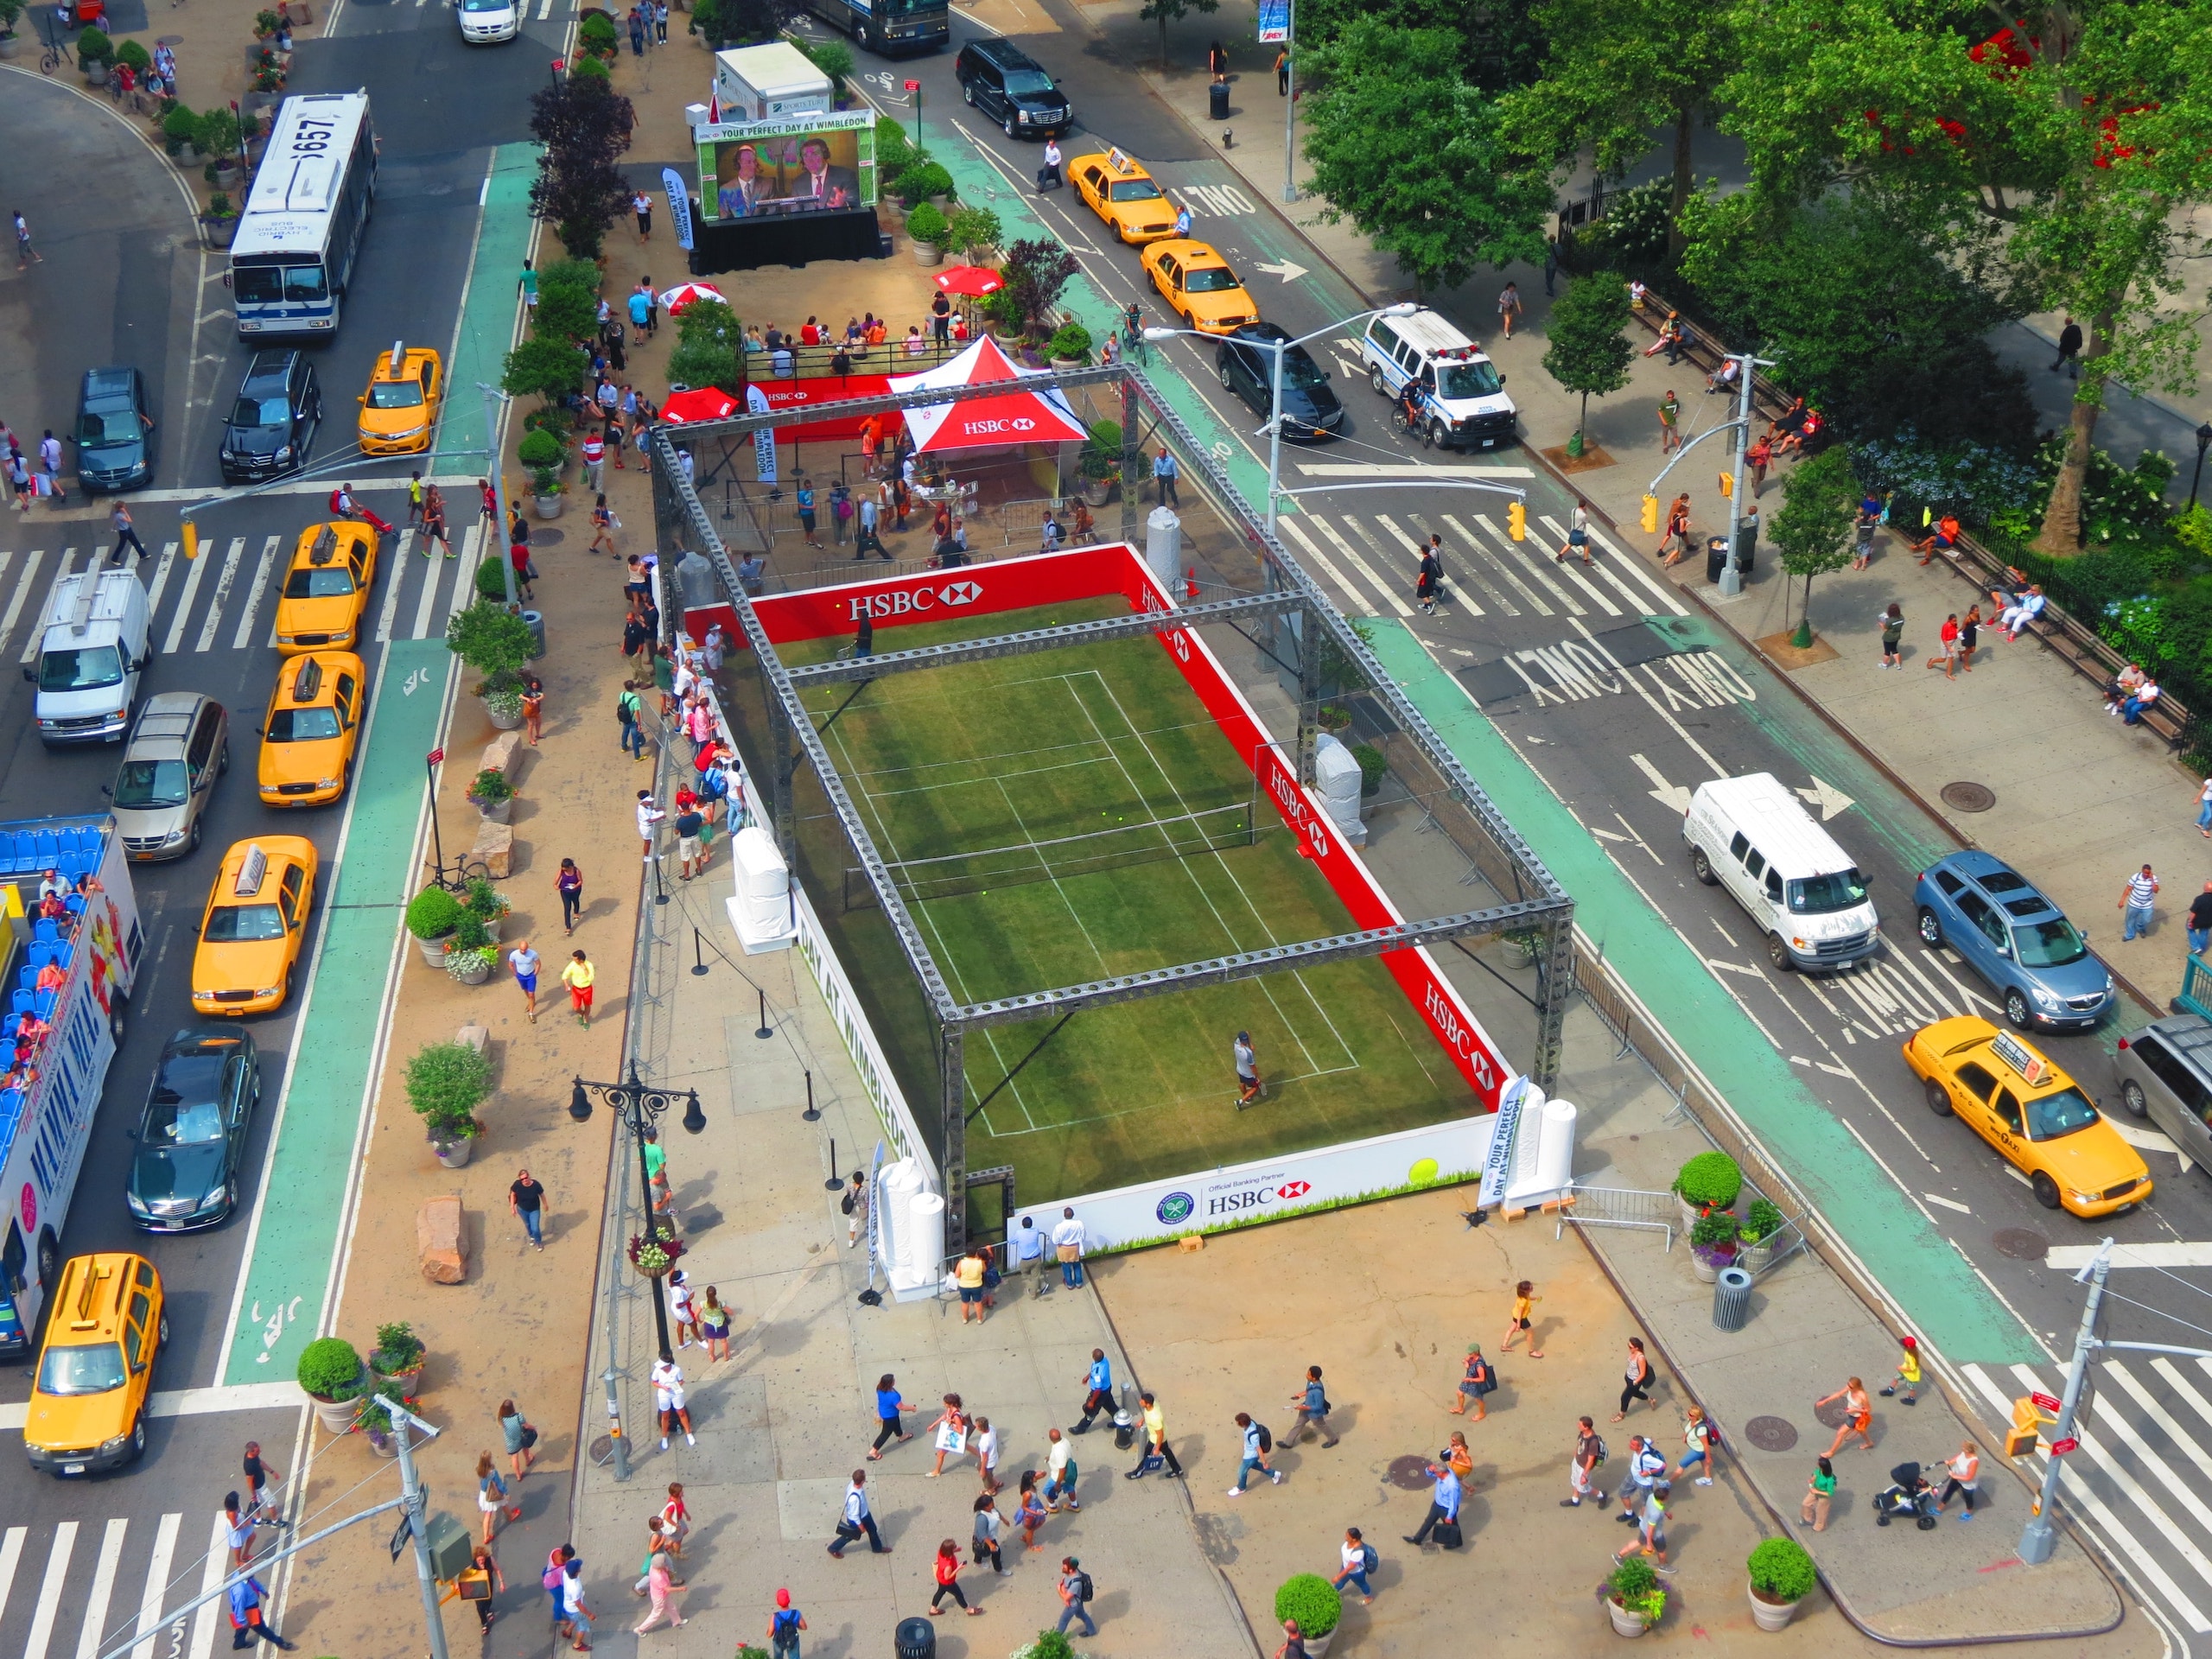 A Wimbledon tennis court is positioned in the middle of the North Flatiron Plaza